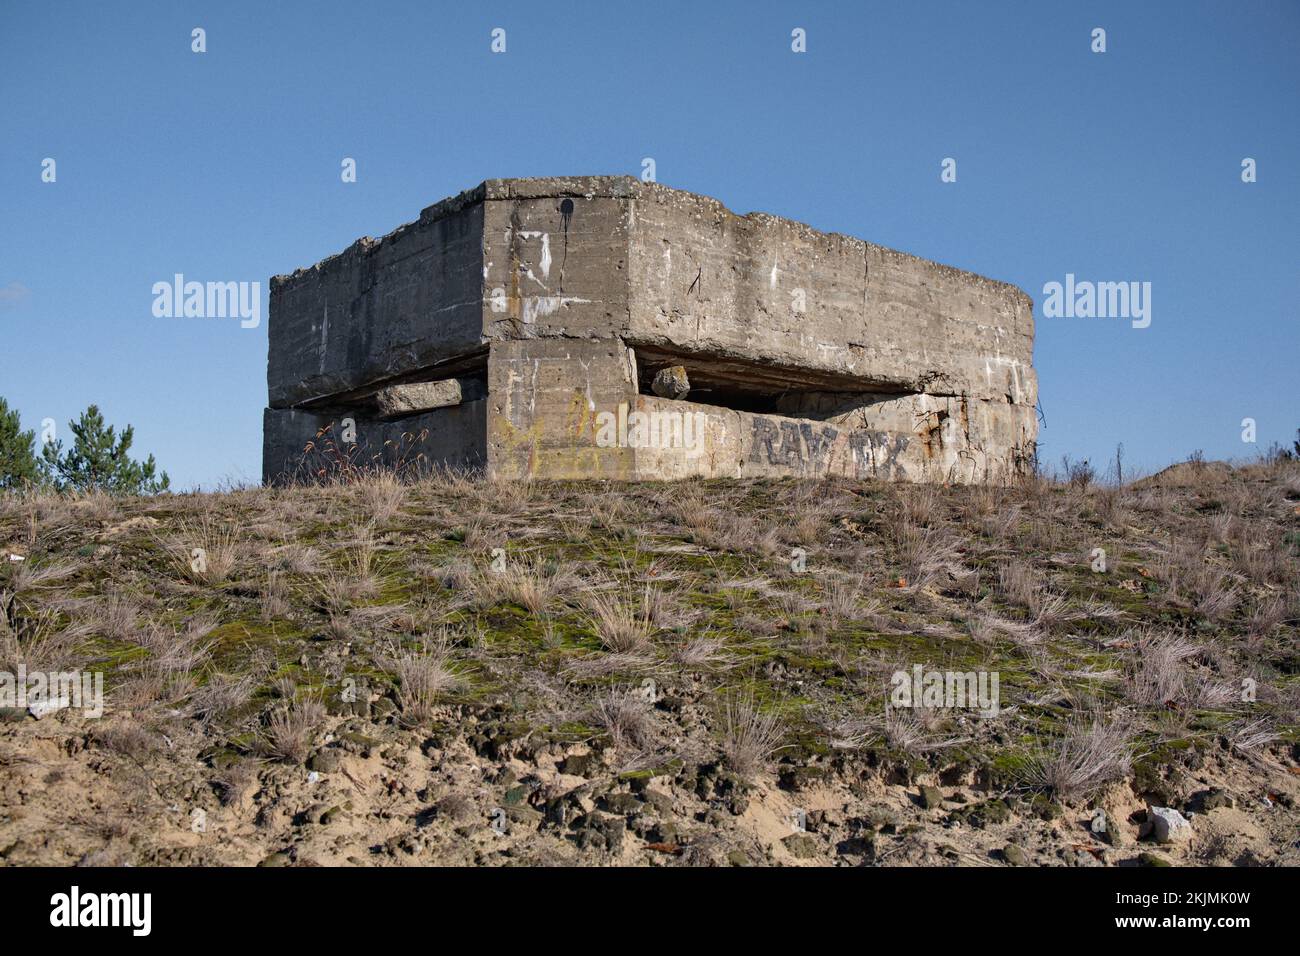 Remainder of a Wehrmacht bunker on the former military training area of Jüterbog, about 3.5 kilometres west of Luckenwalde, Teltow-Fläming district, B Stock Photo